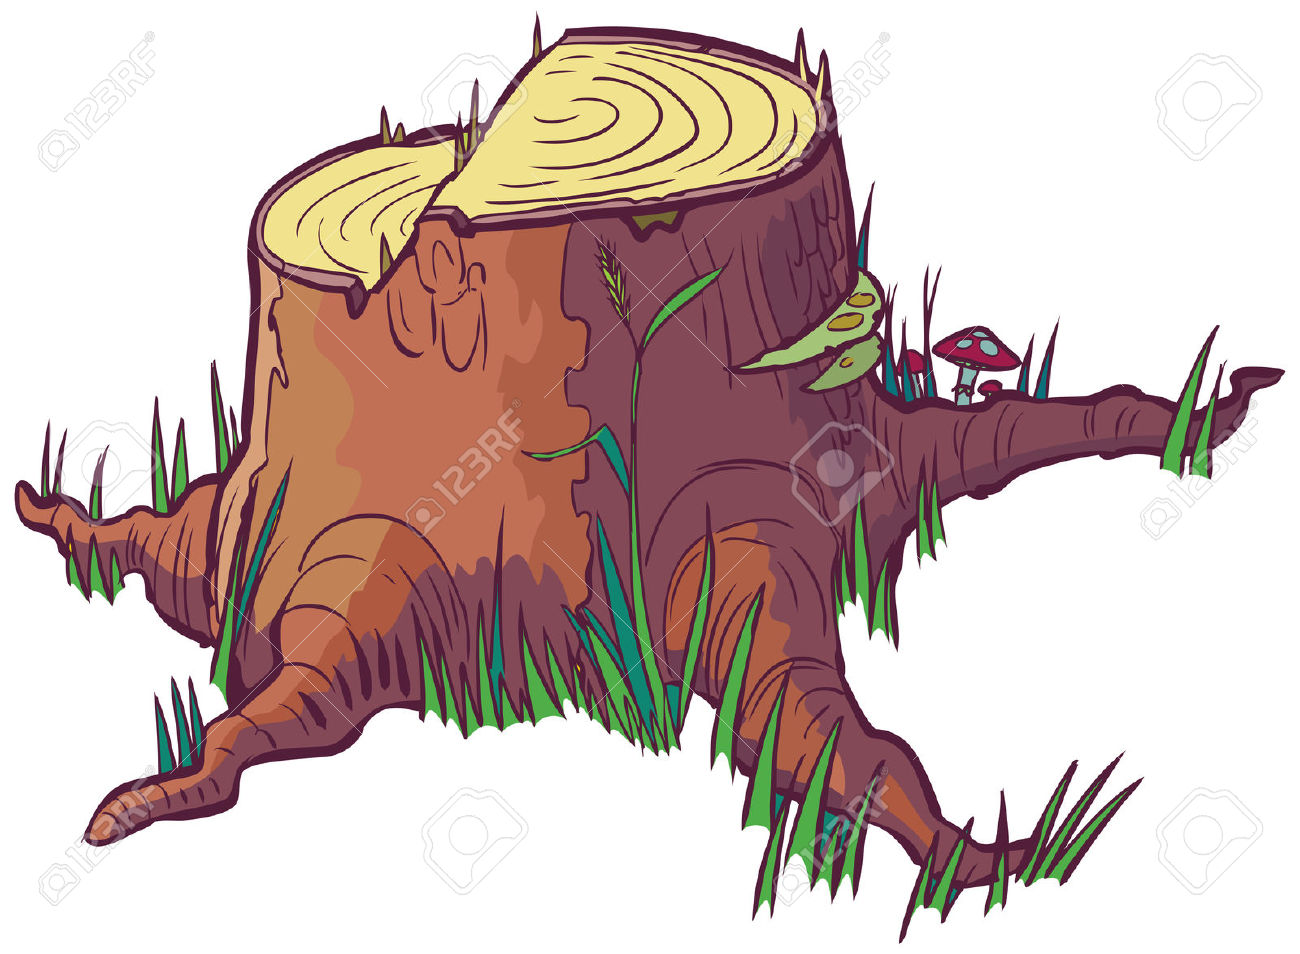 Stump clipart #7, Download drawings